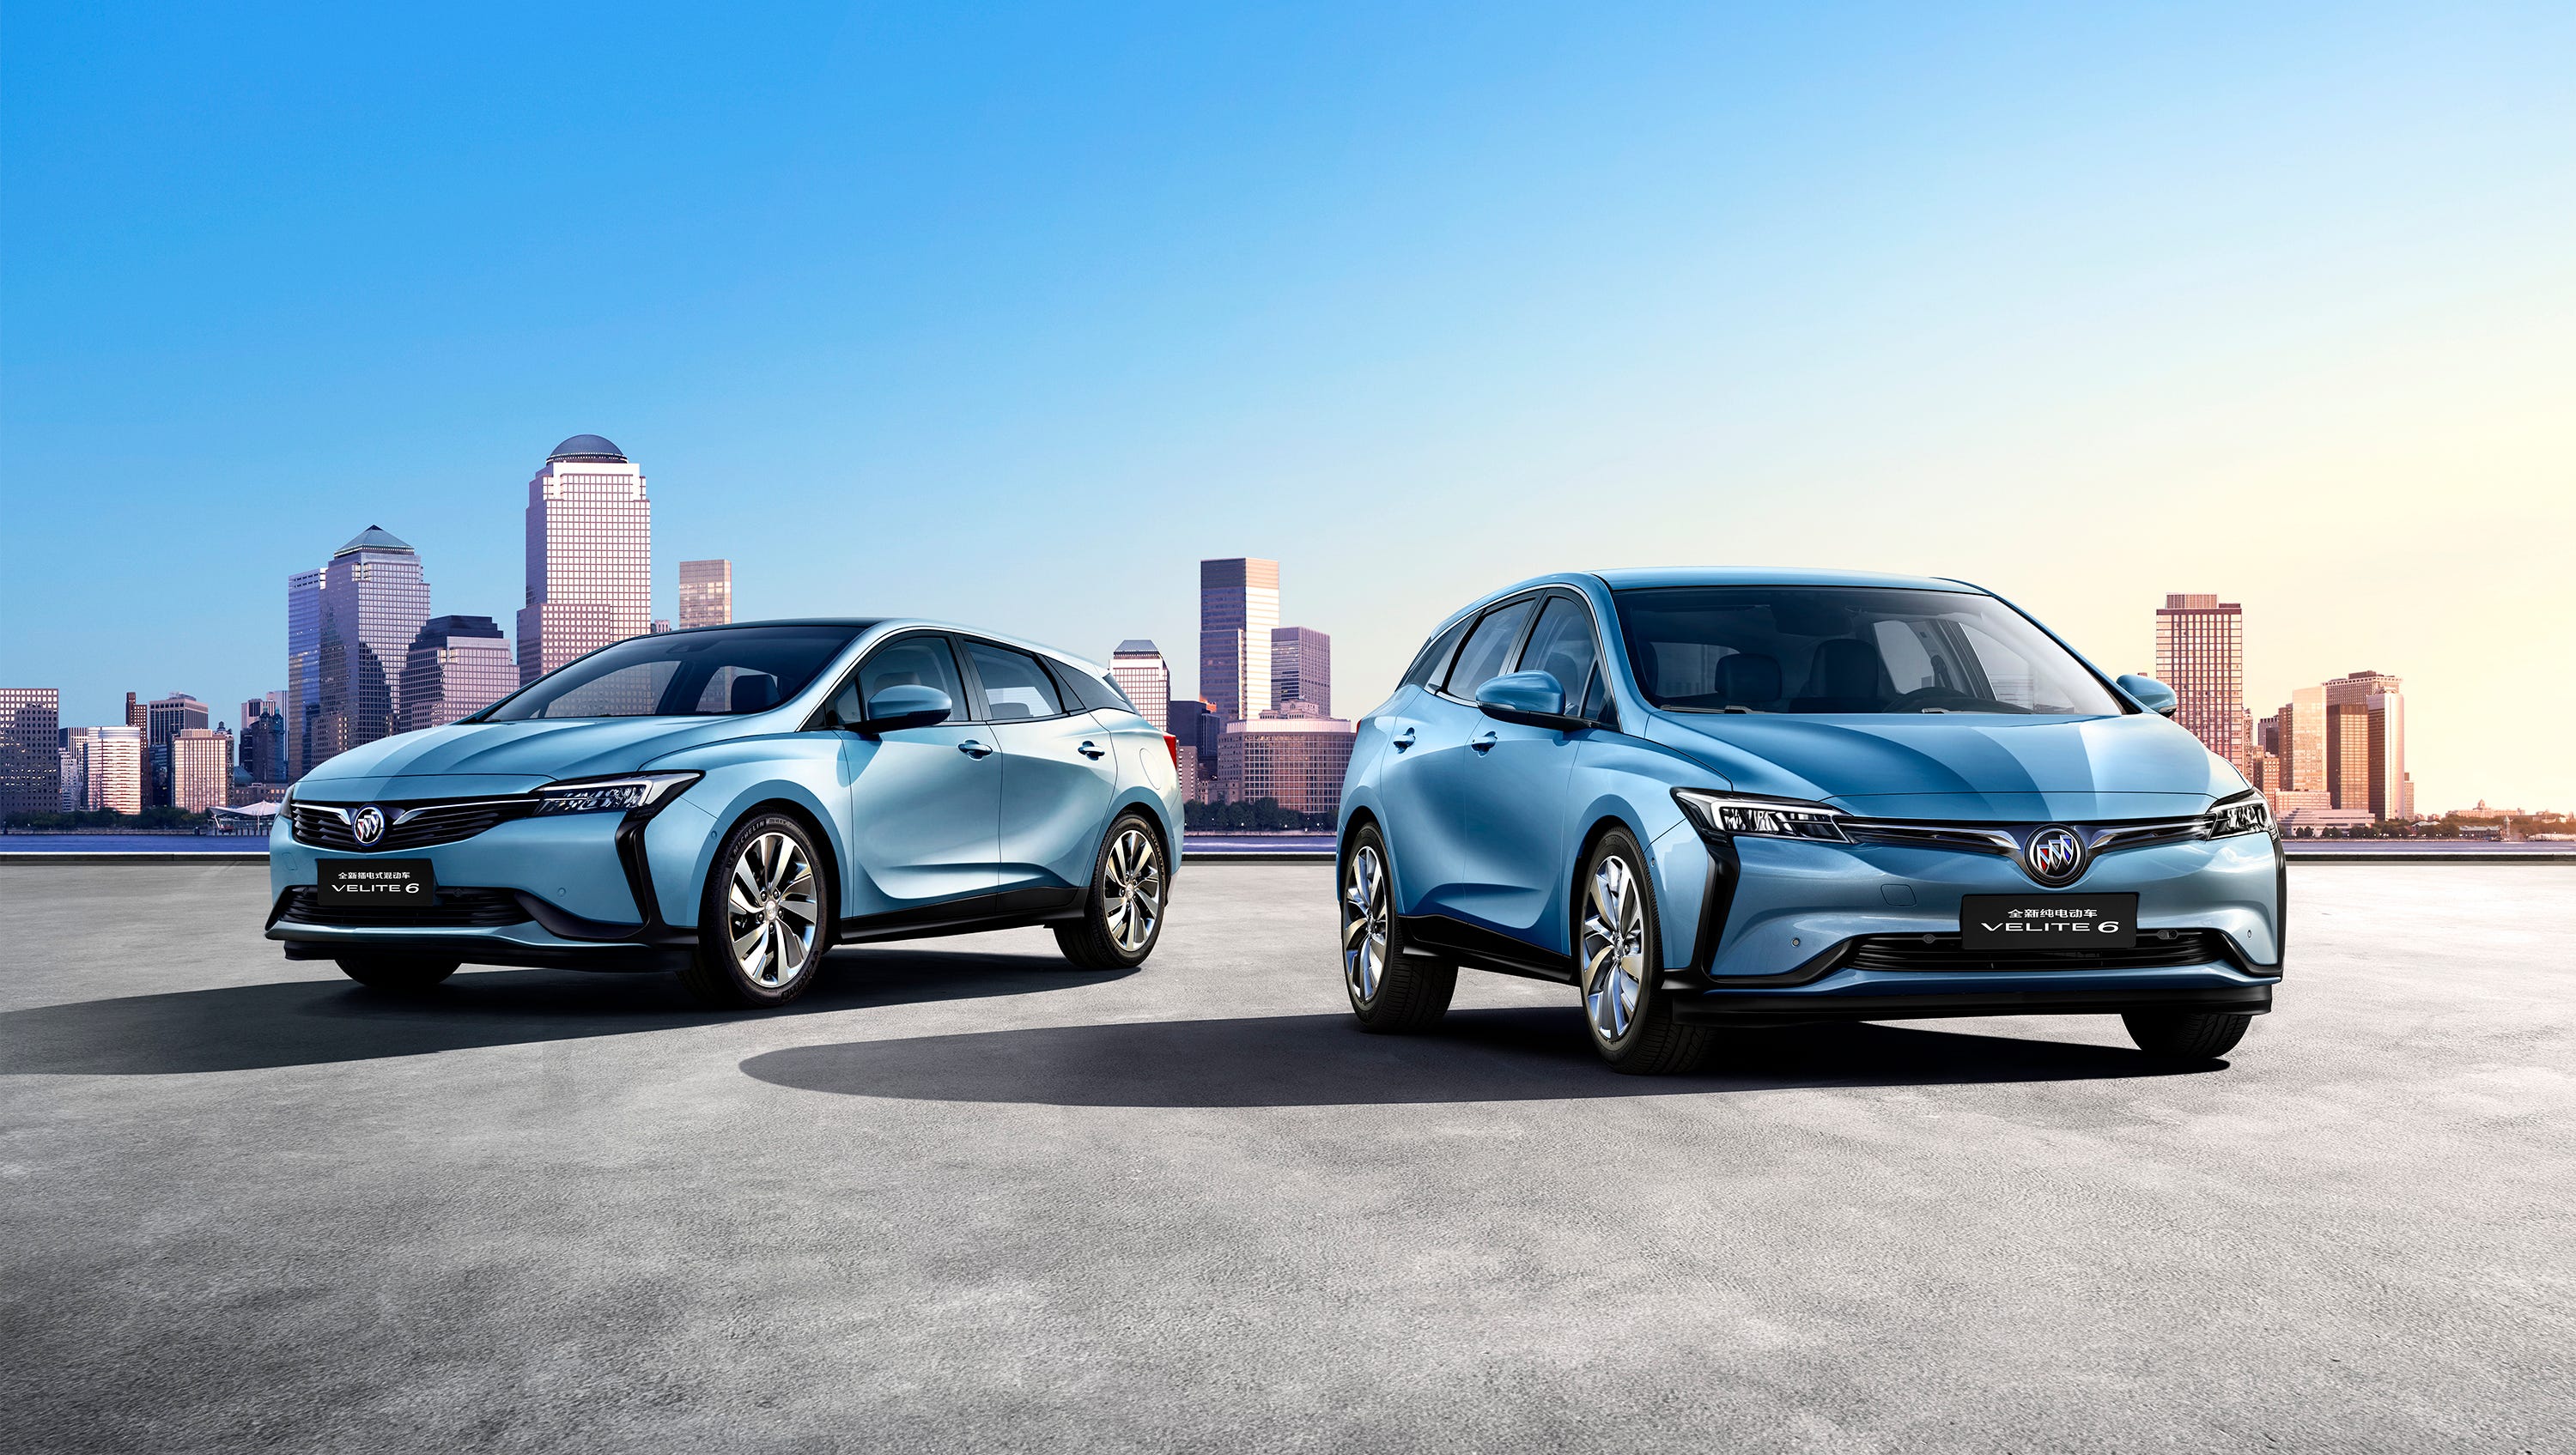 GM introduced the Buick Velite electric and plug-in hybrid at the Beijing auto show.